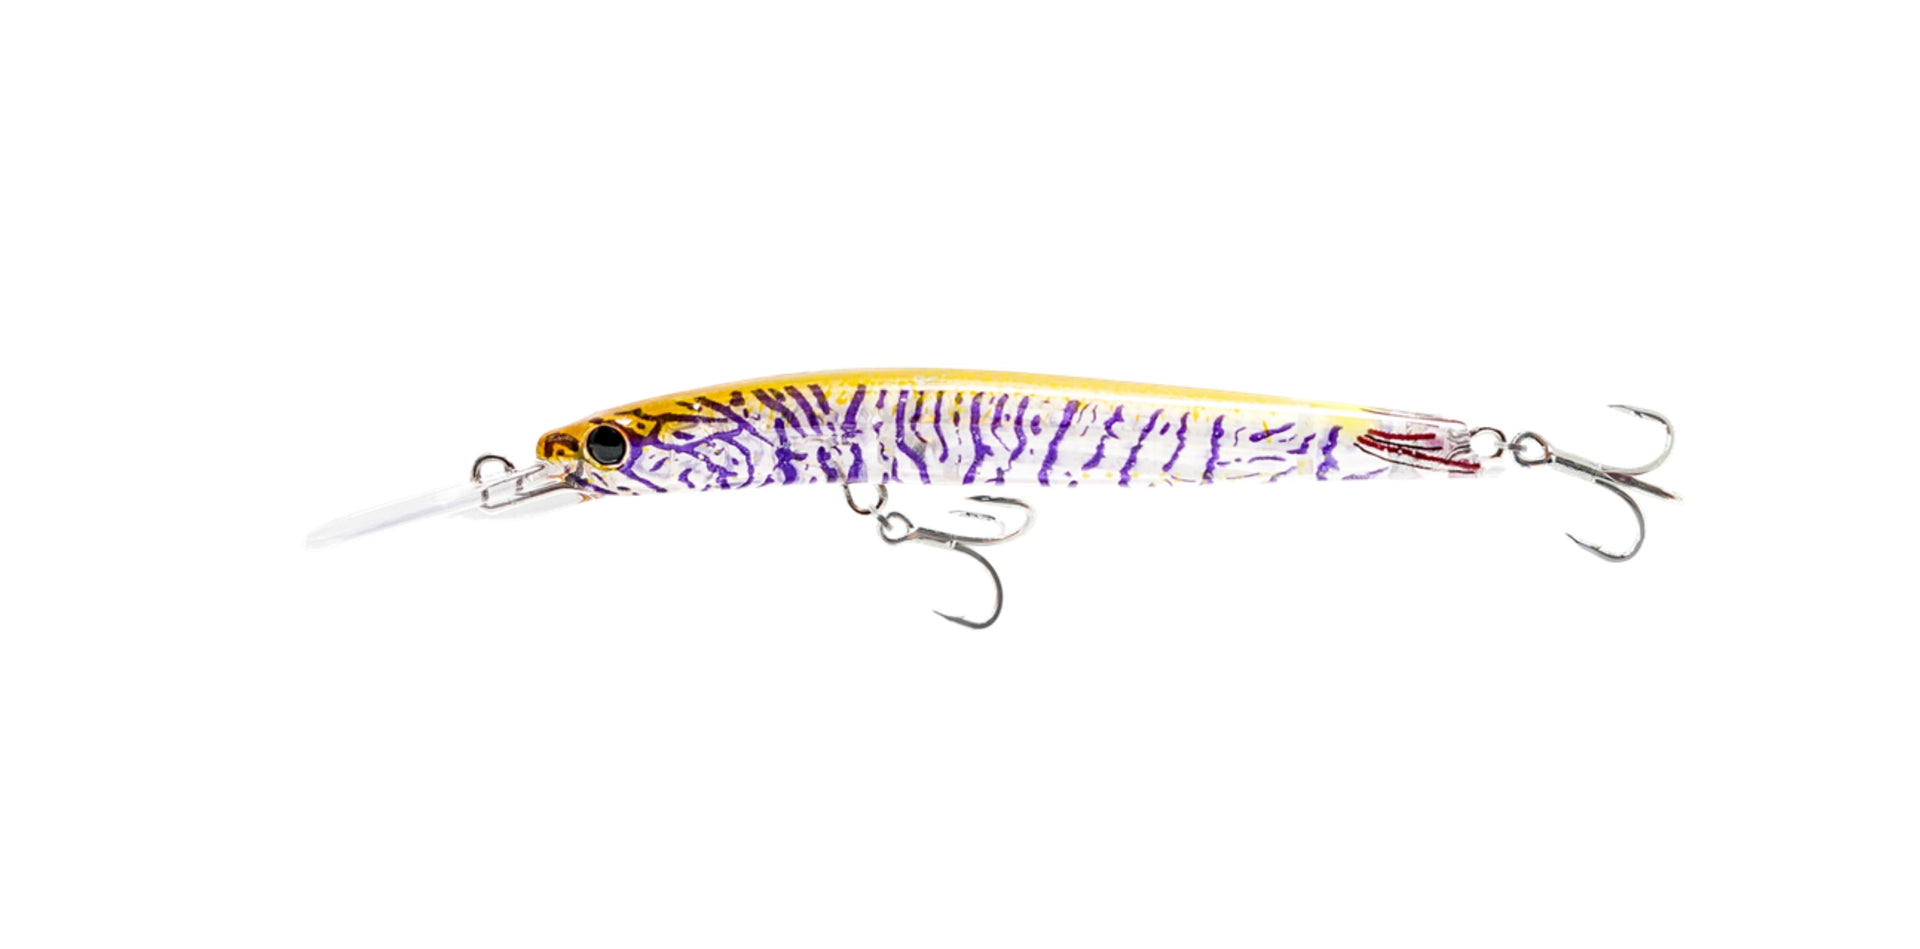 Nomad Design Styx Minnow 70mm Suspending - Holographic Purple Shrimp –  Trophy Trout Lures and Fly Fishing